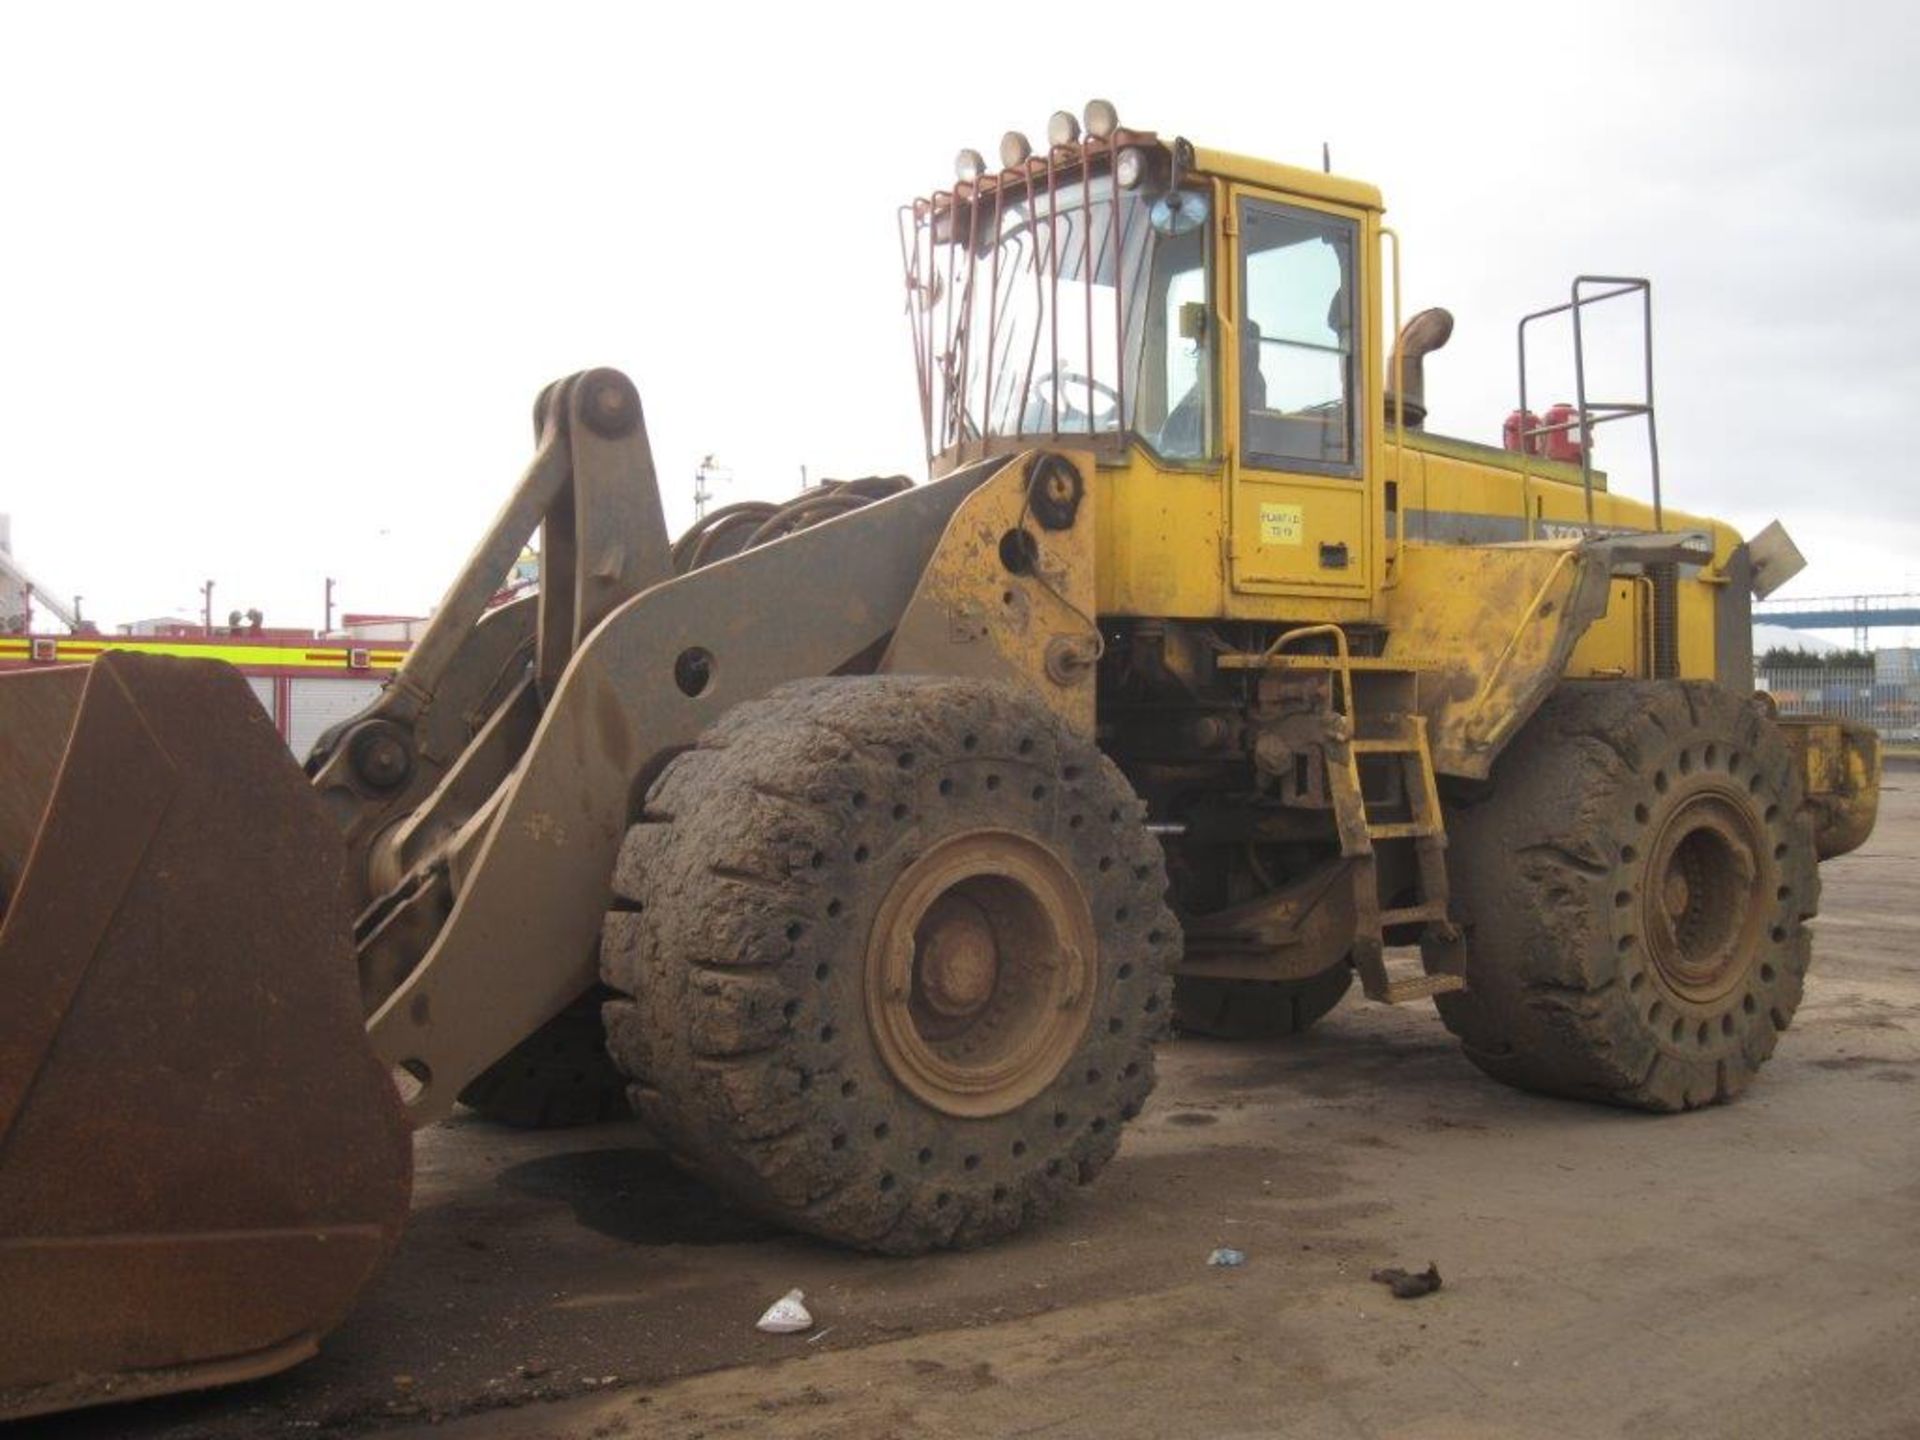 Volvo L220D Loading Shovel
1999 and direct from work, one owner from new, good bucket and solid